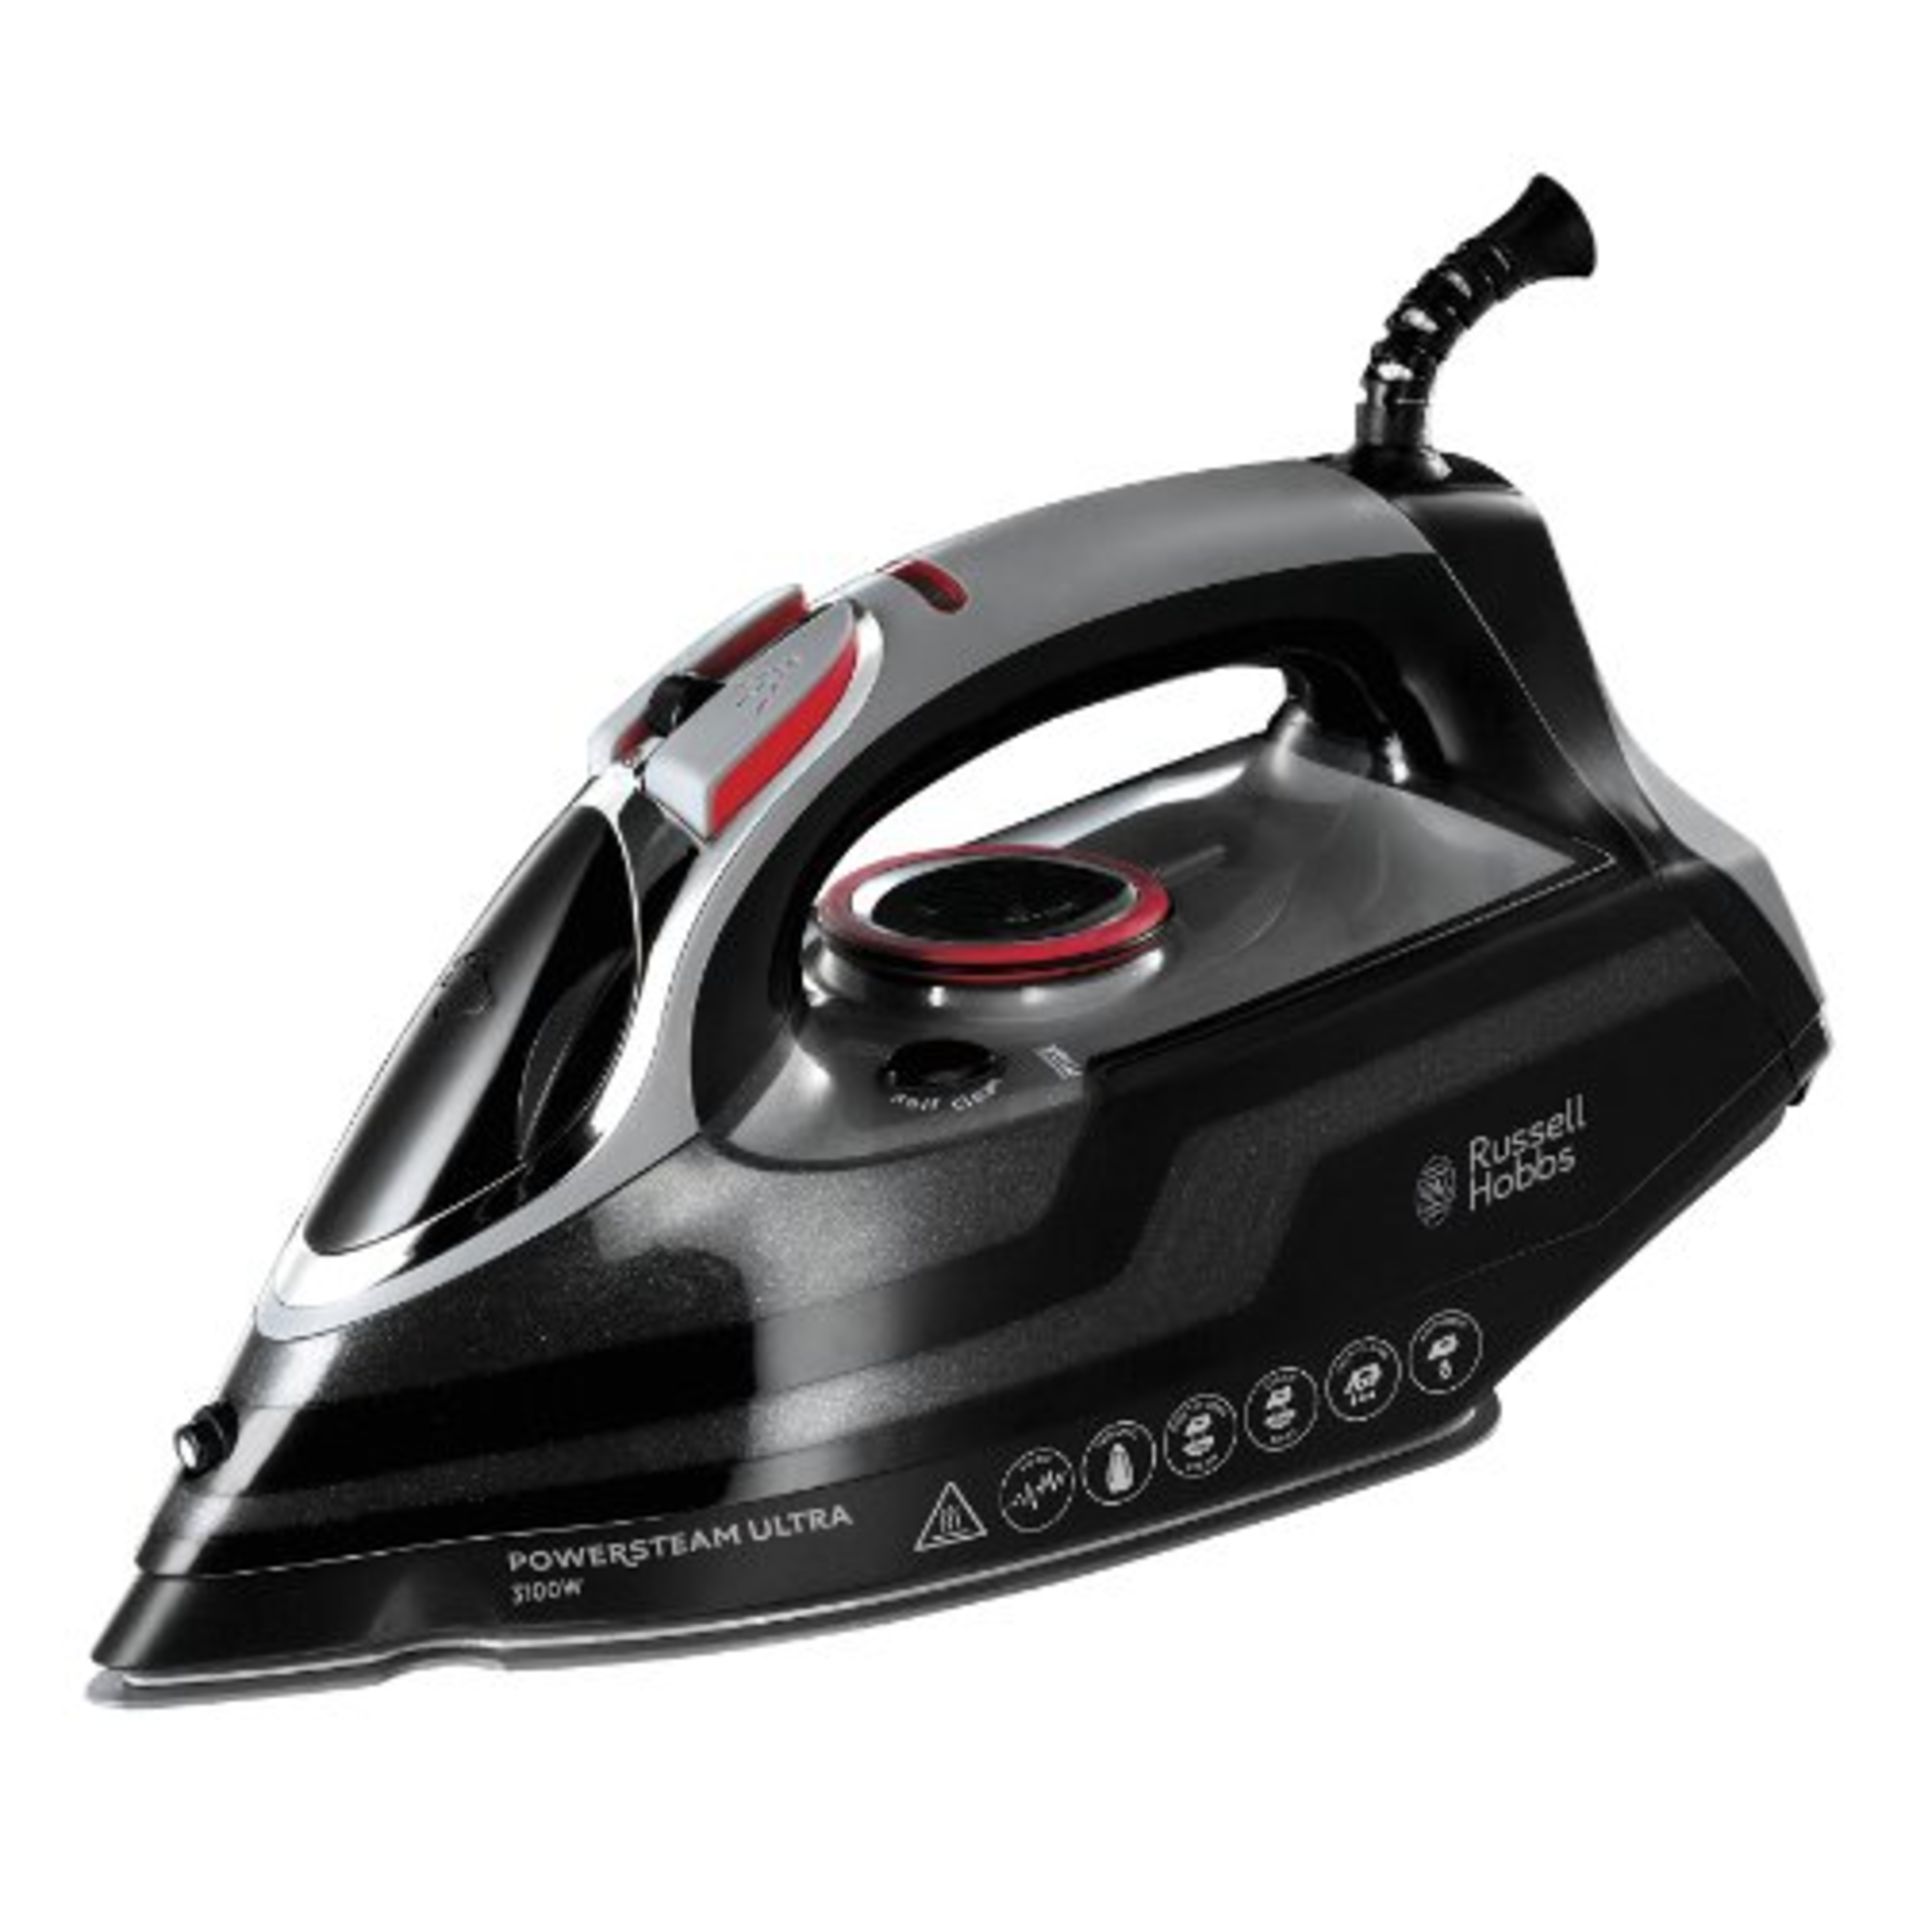 Russell Hobbs Powersteam Ultra 3100 W Vertical Steam Iron 20630 - Black and Grey - Image 13 of 15